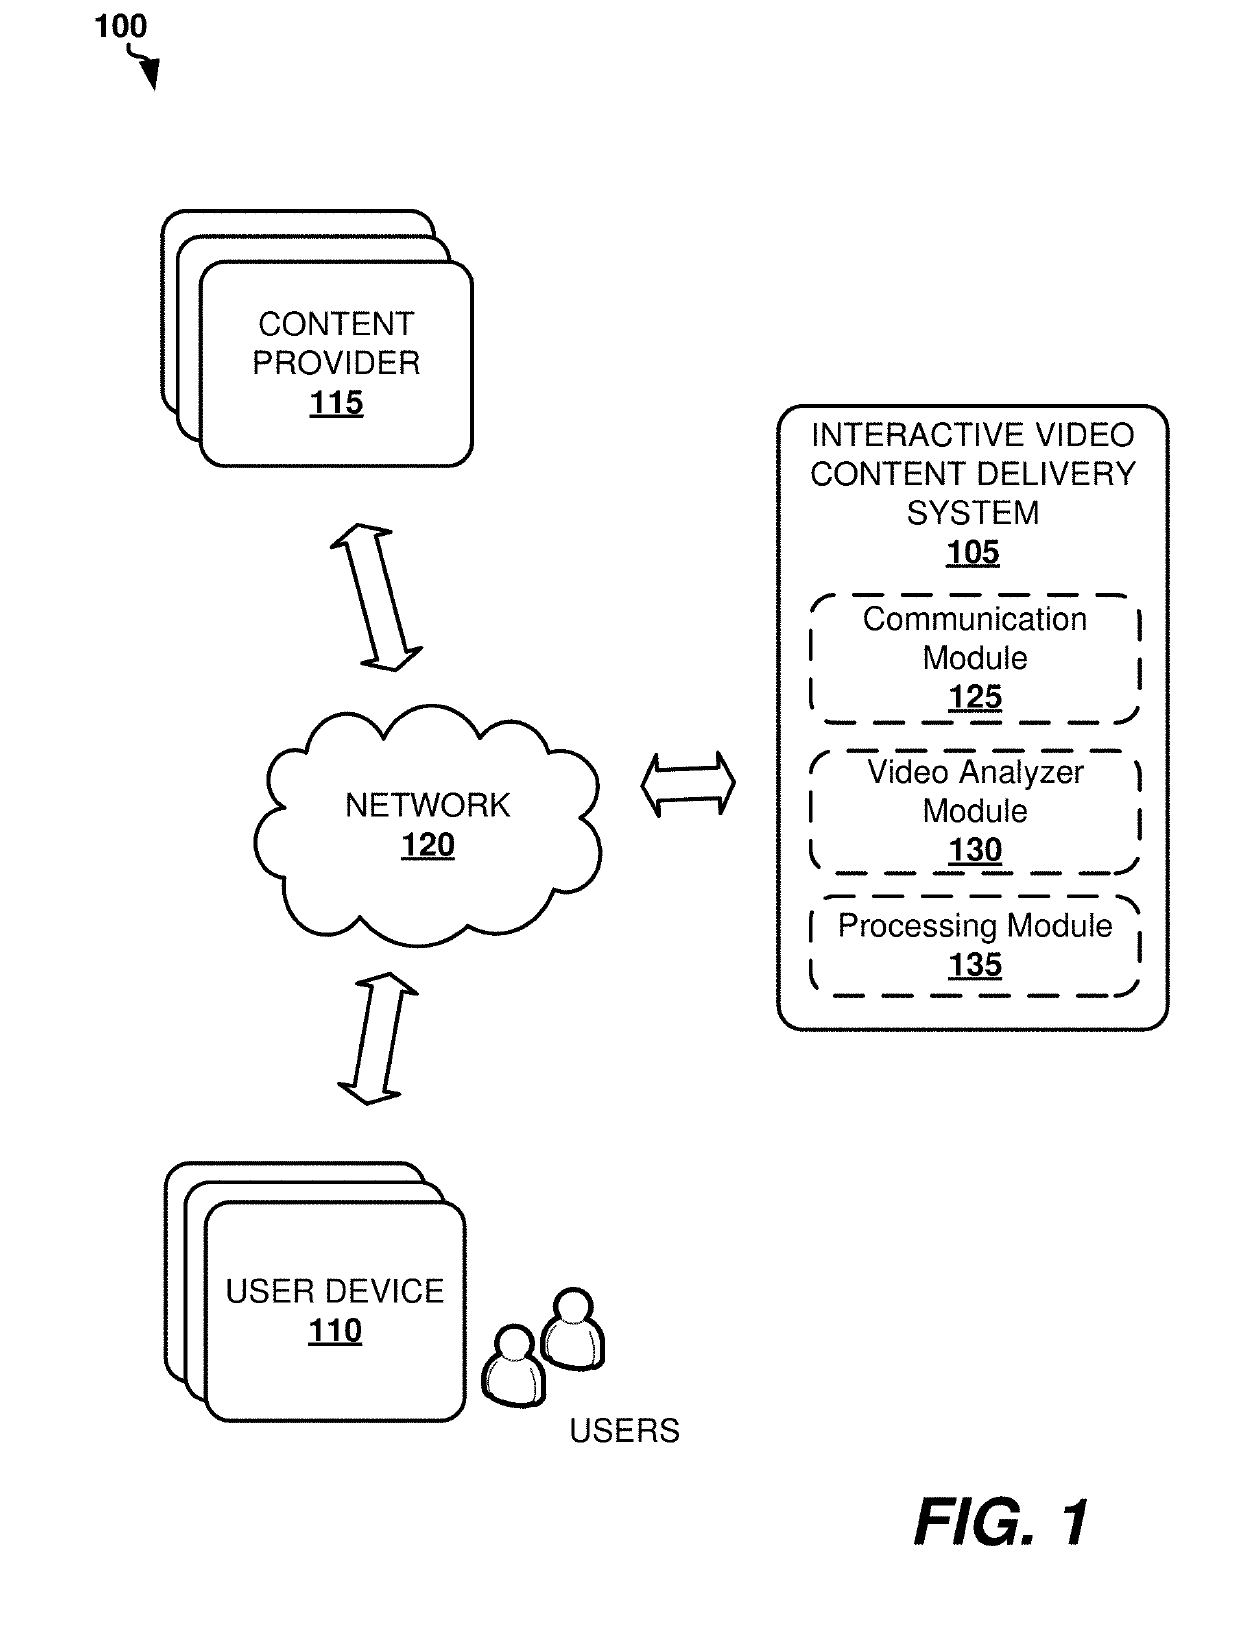 Interactive Video Content Delivery